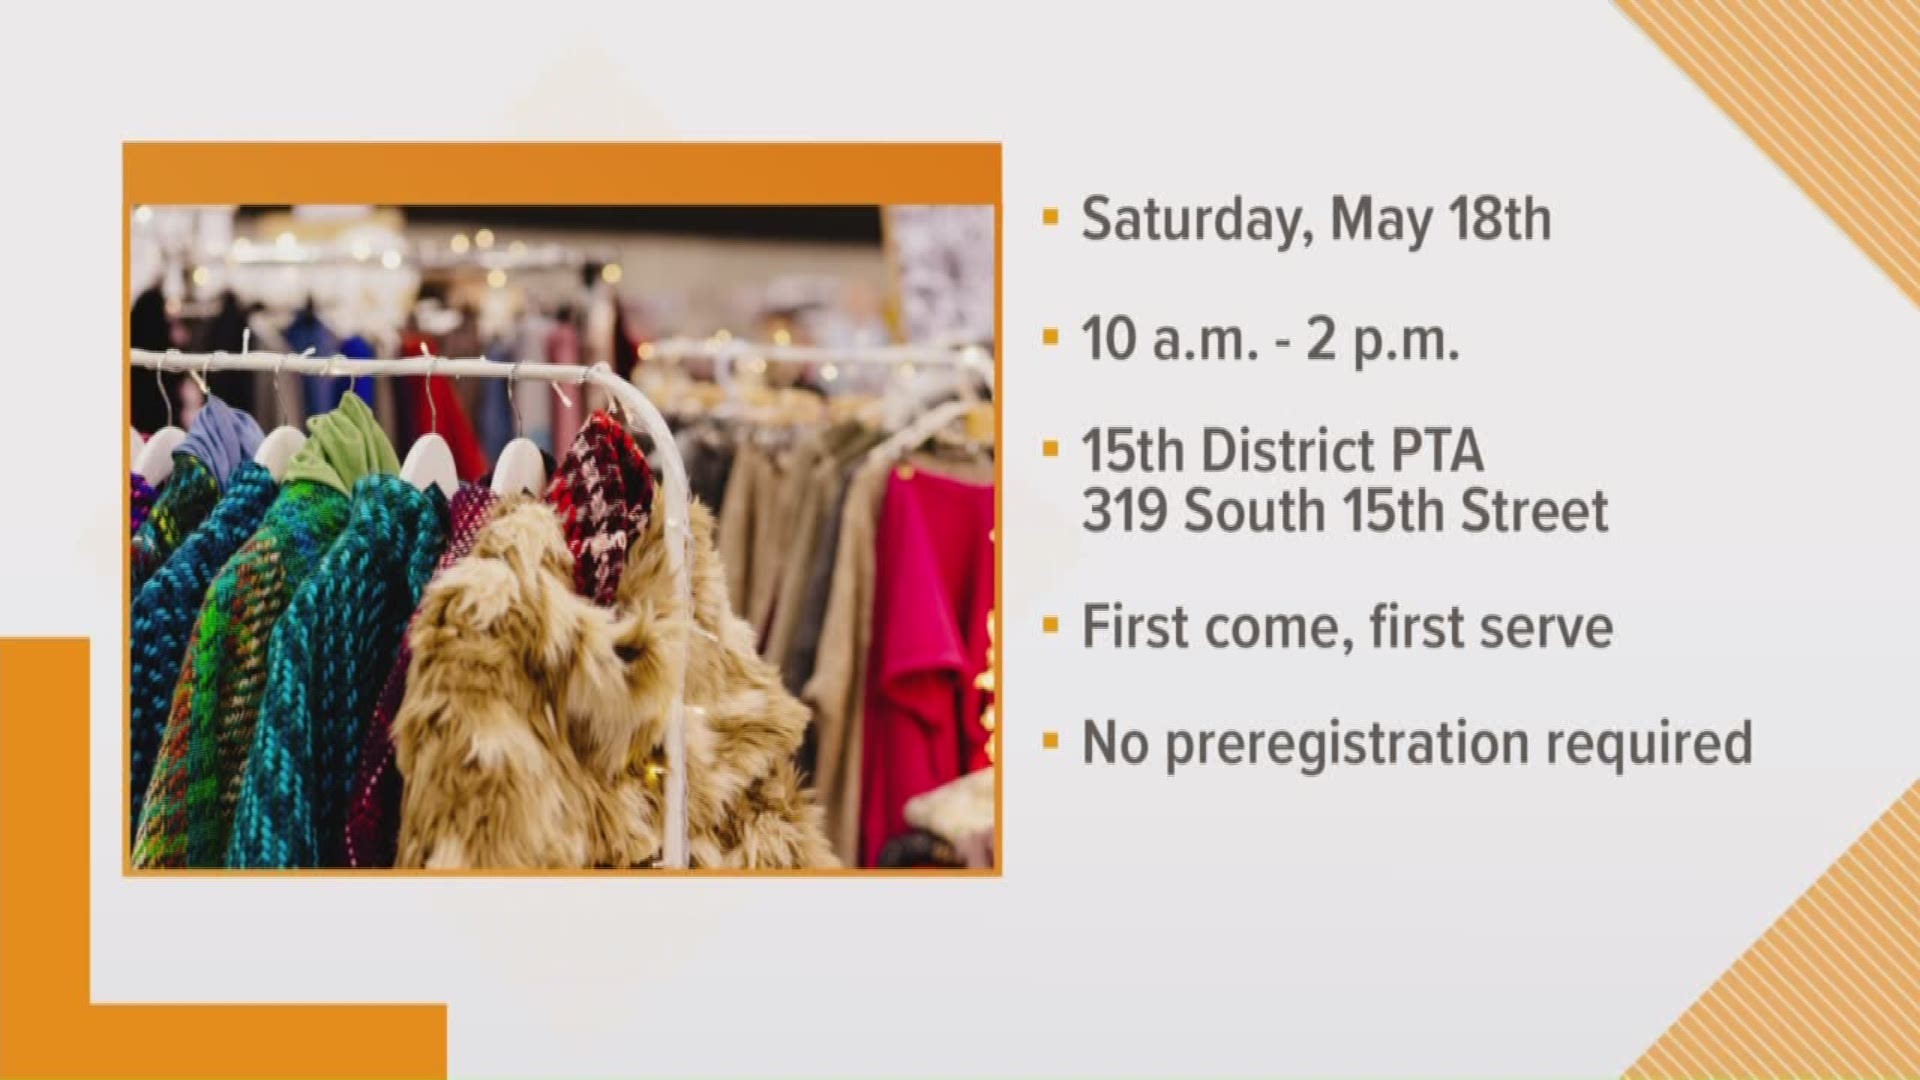 If you love to thrift you'll love the prices at the Women's Unsale event because everything is free!